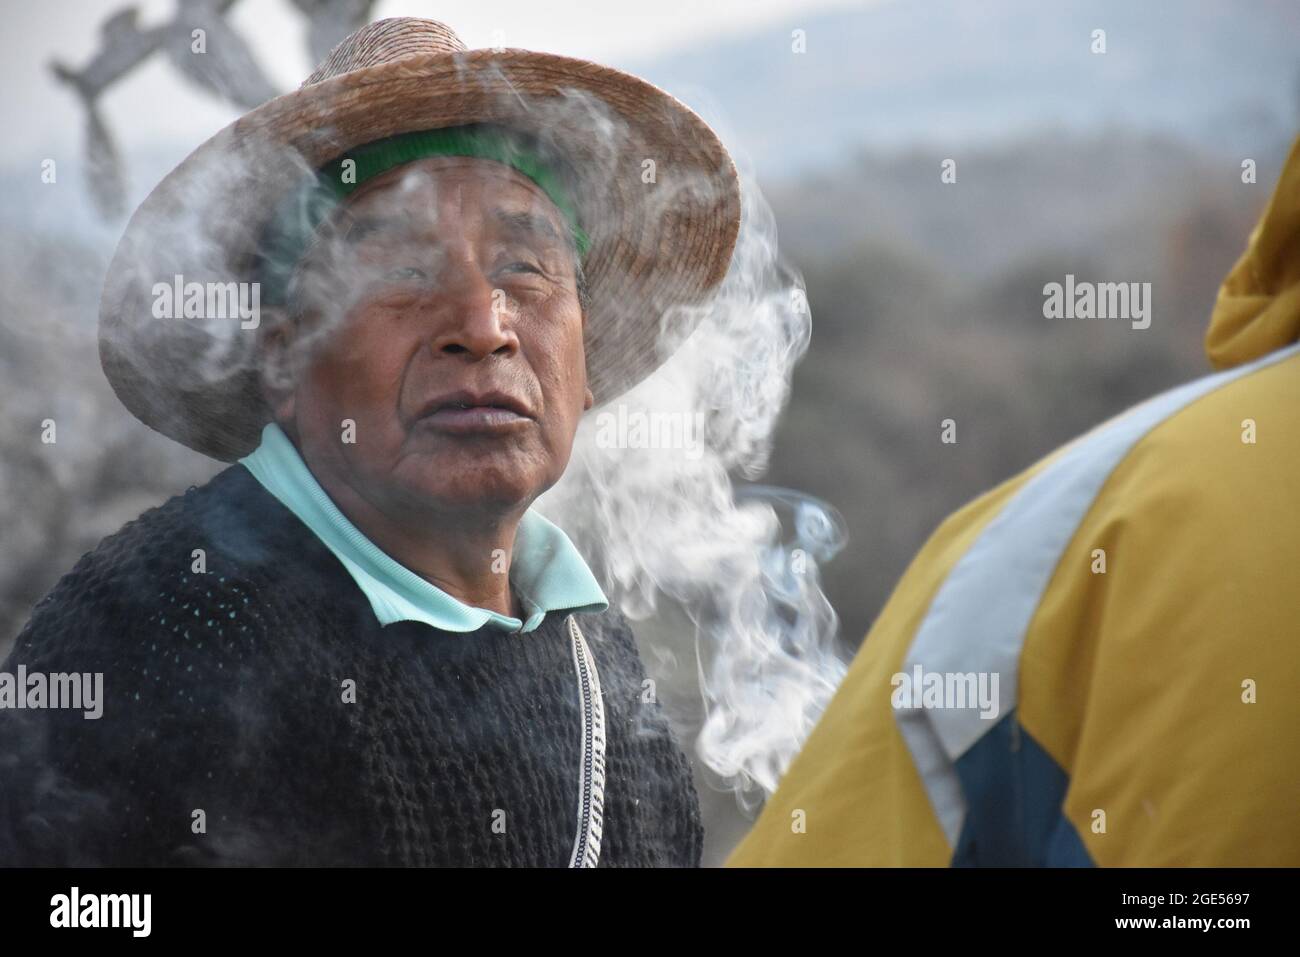 Indigenous people purify themselves with incense at the start of a ritual to mark the winter solstice. Stock Photo